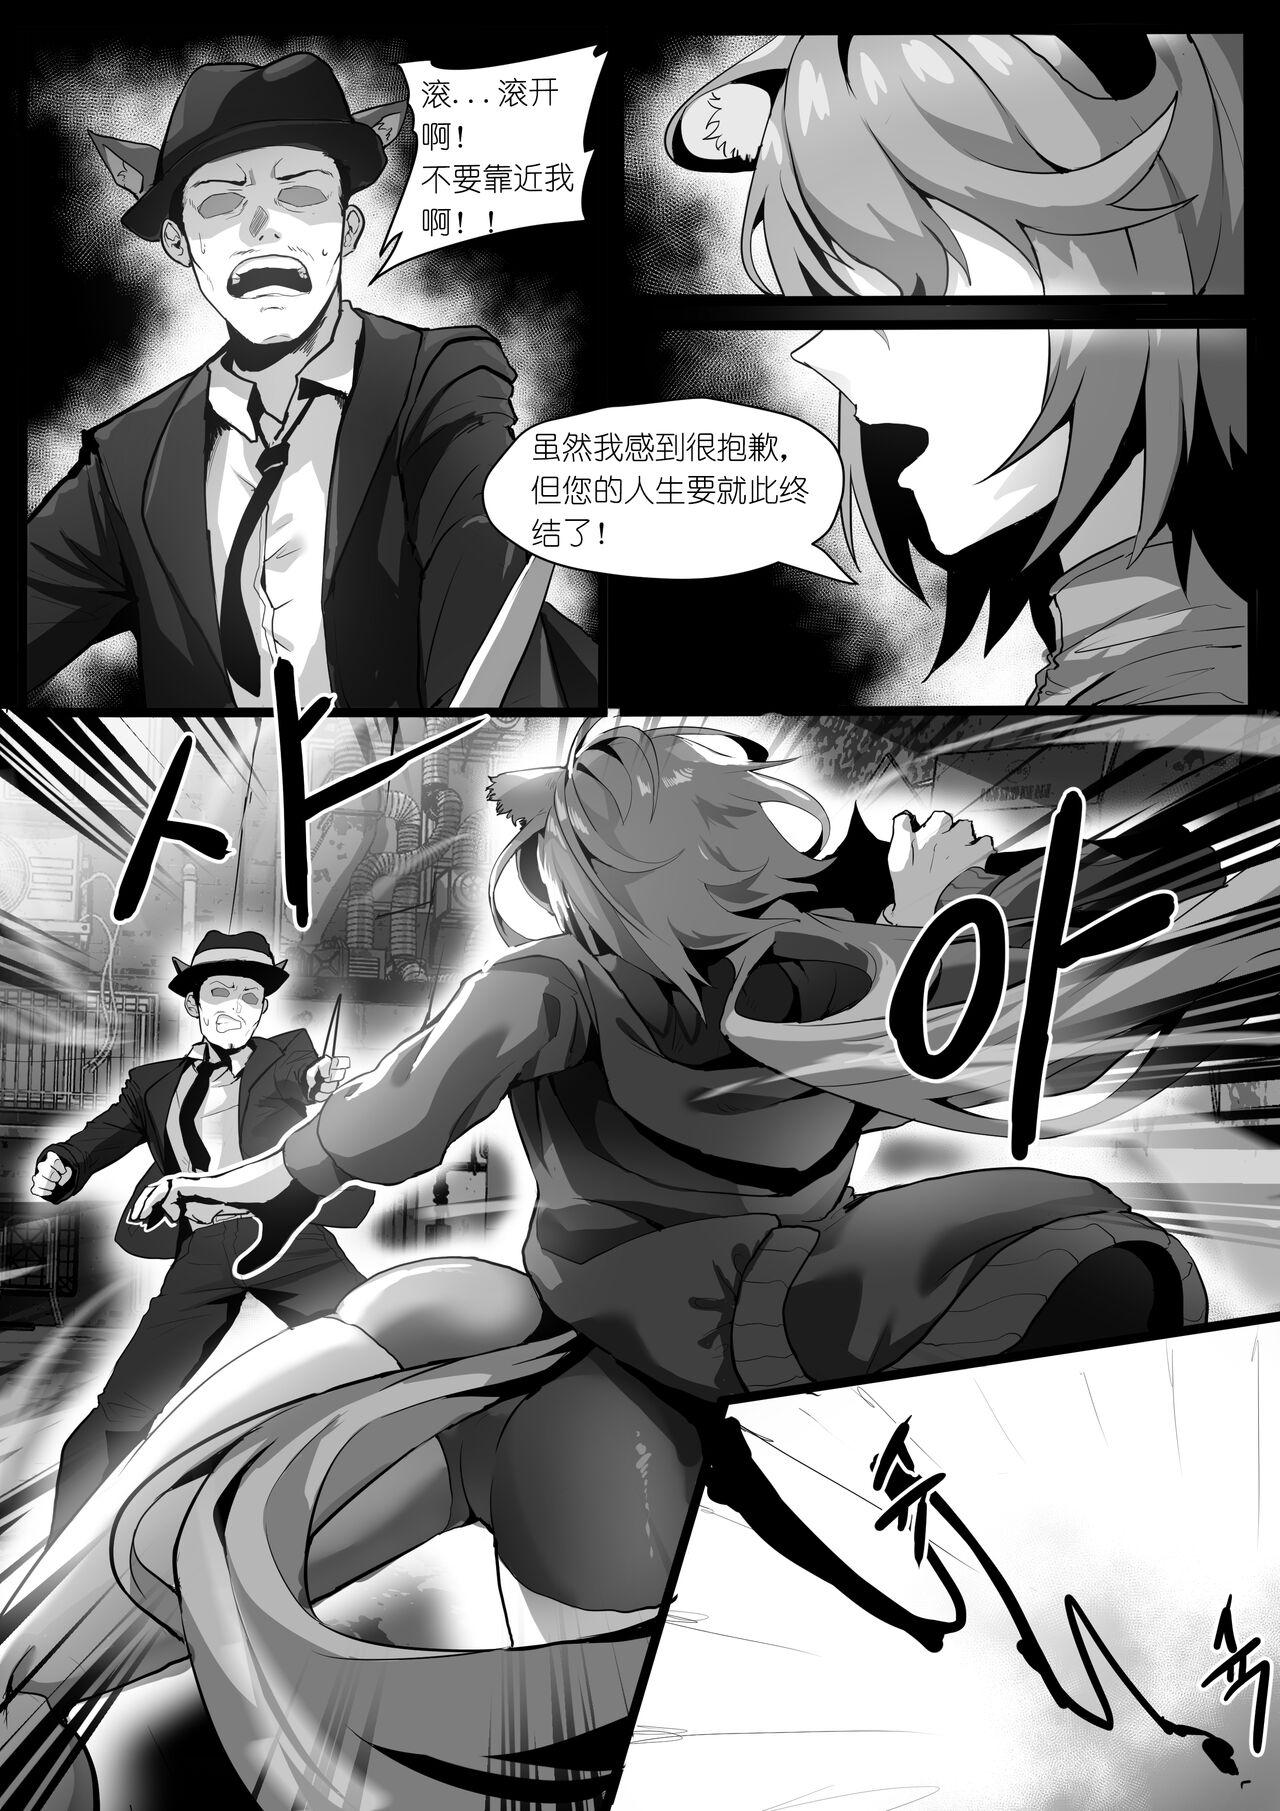 Creampie 欲望方舟记录3 - Arknights Made - Page 9